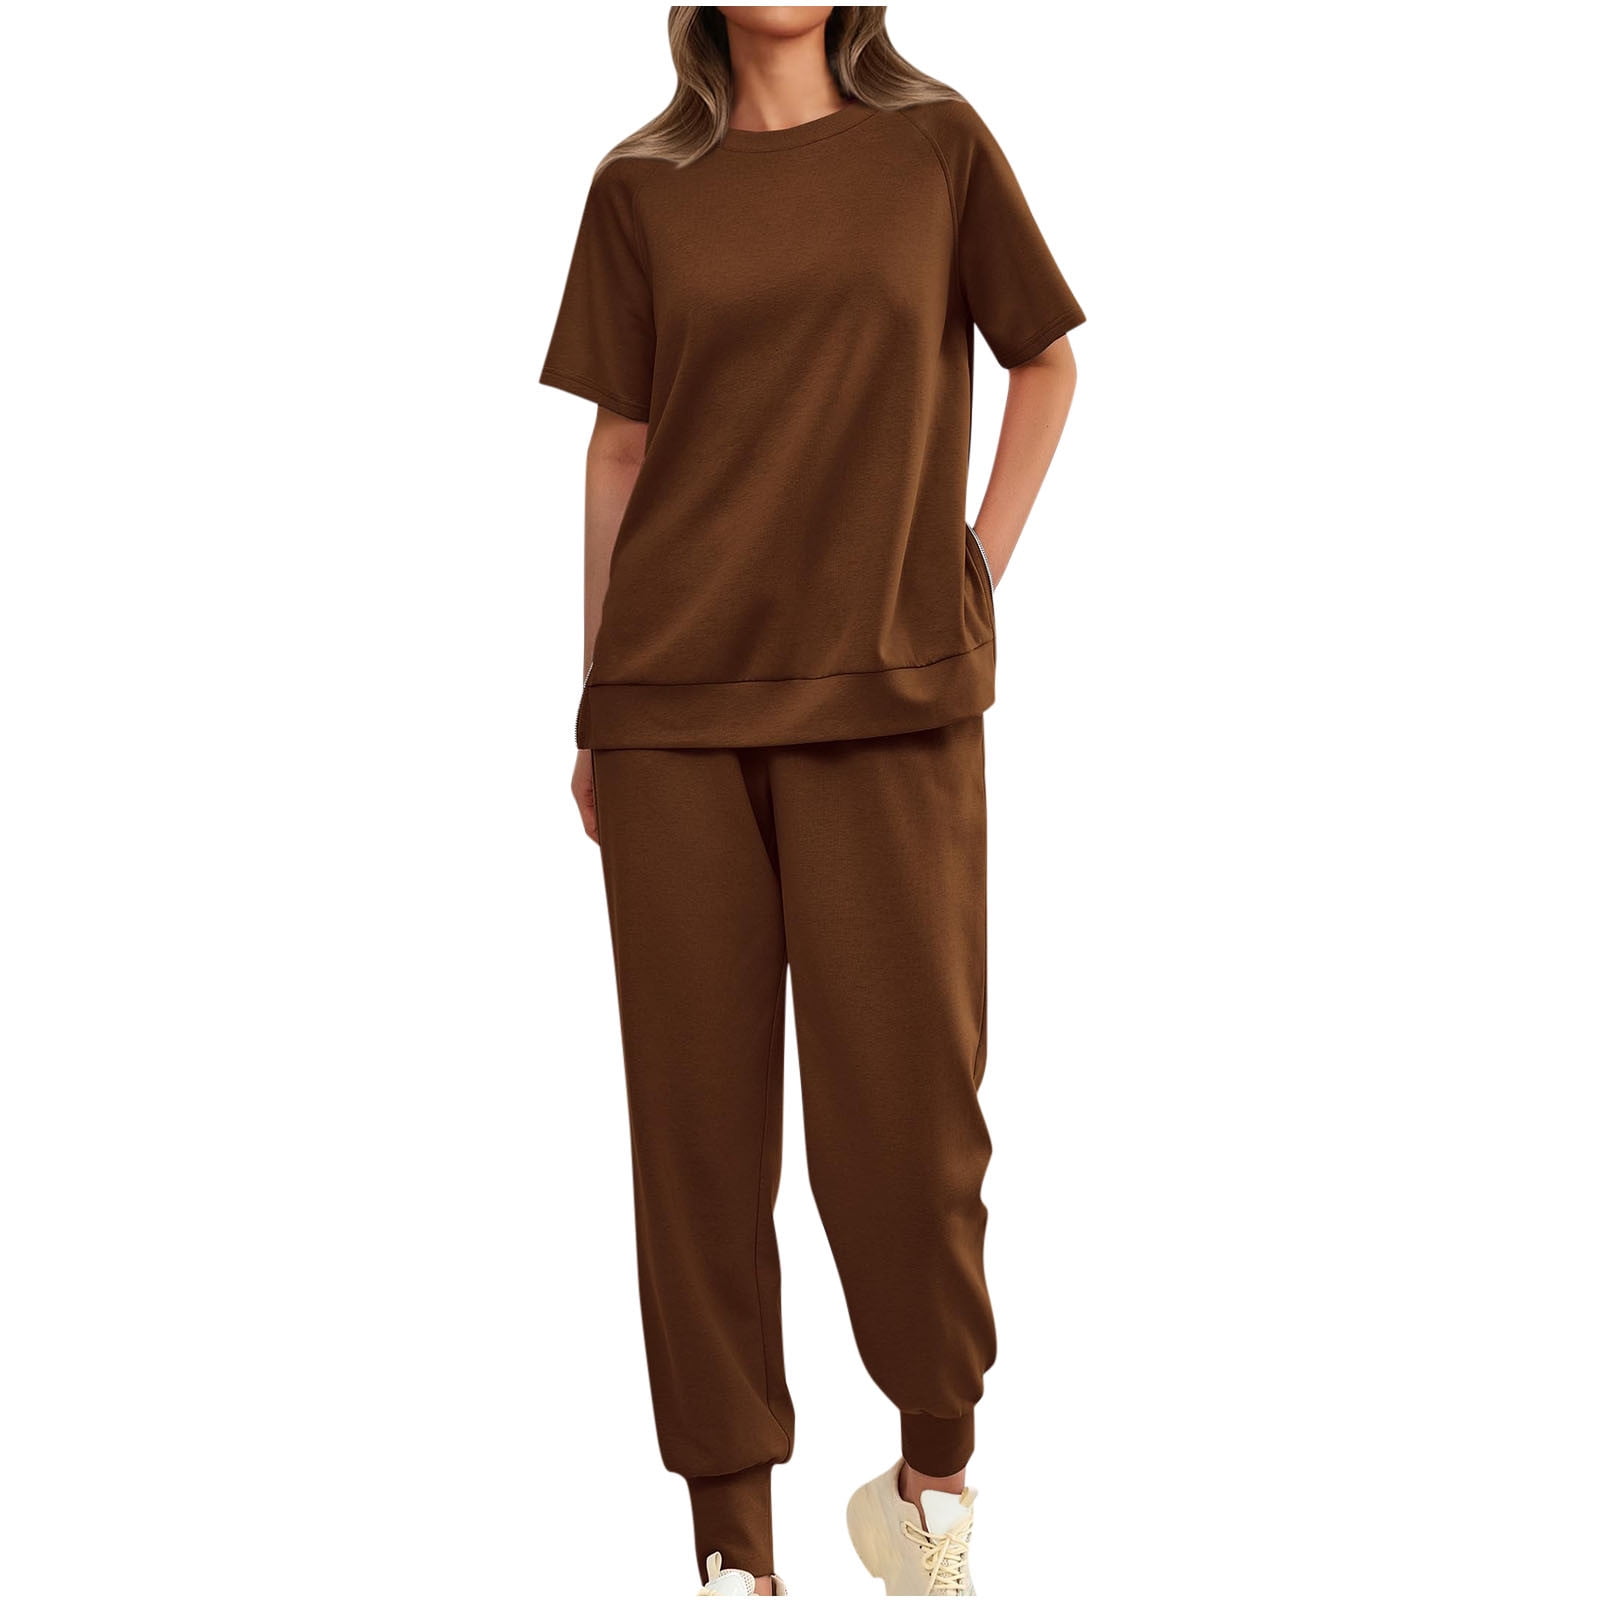 AherBiu Womens Sweatsuits Short Sleeve Side Slit Tops with Joggers ...